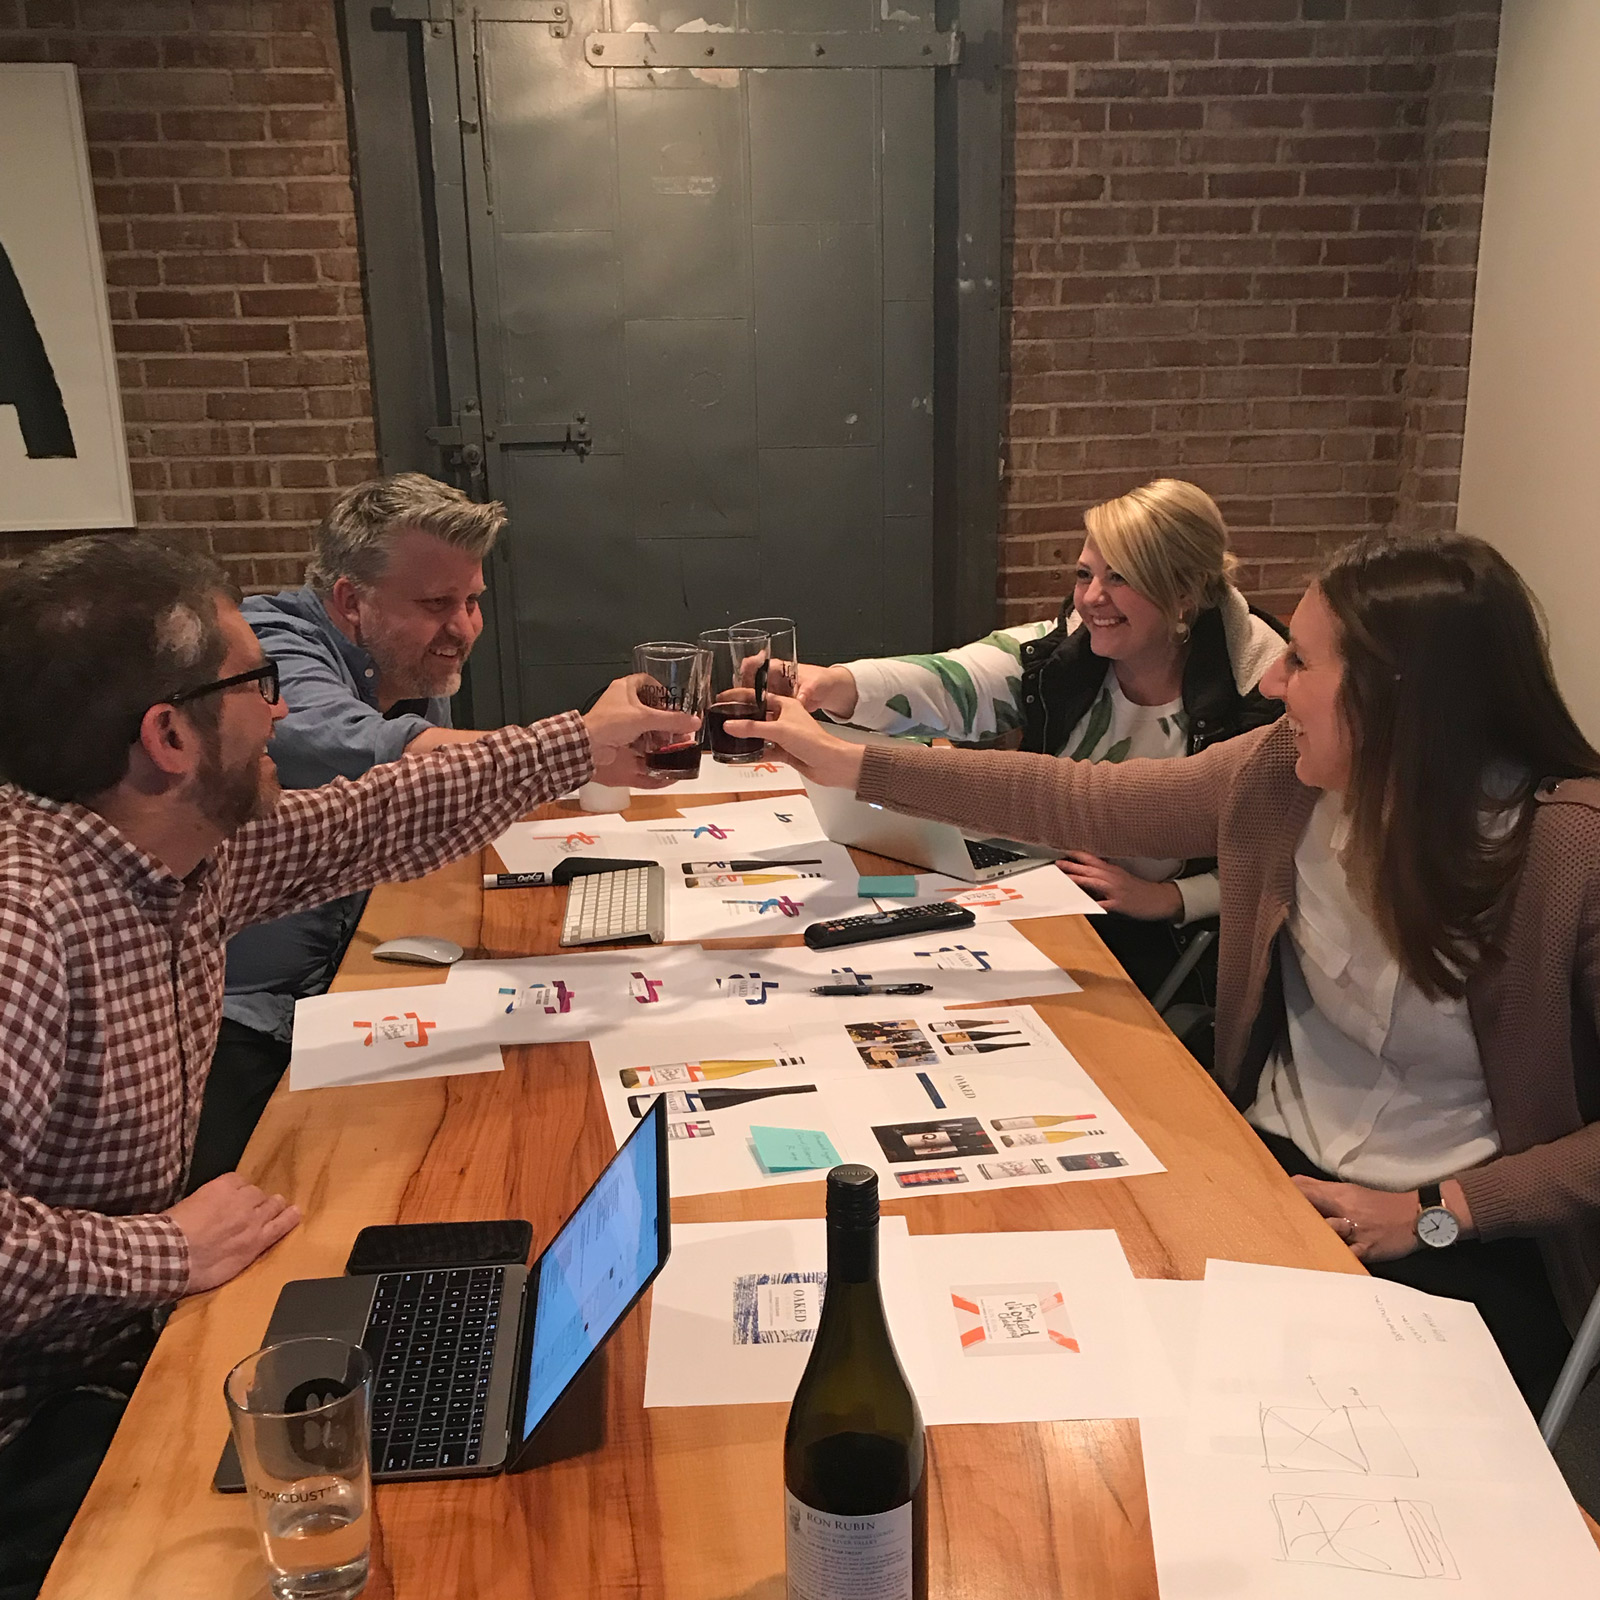 The Atomicdust team cheers Ron Rubin wine during a website design meeting